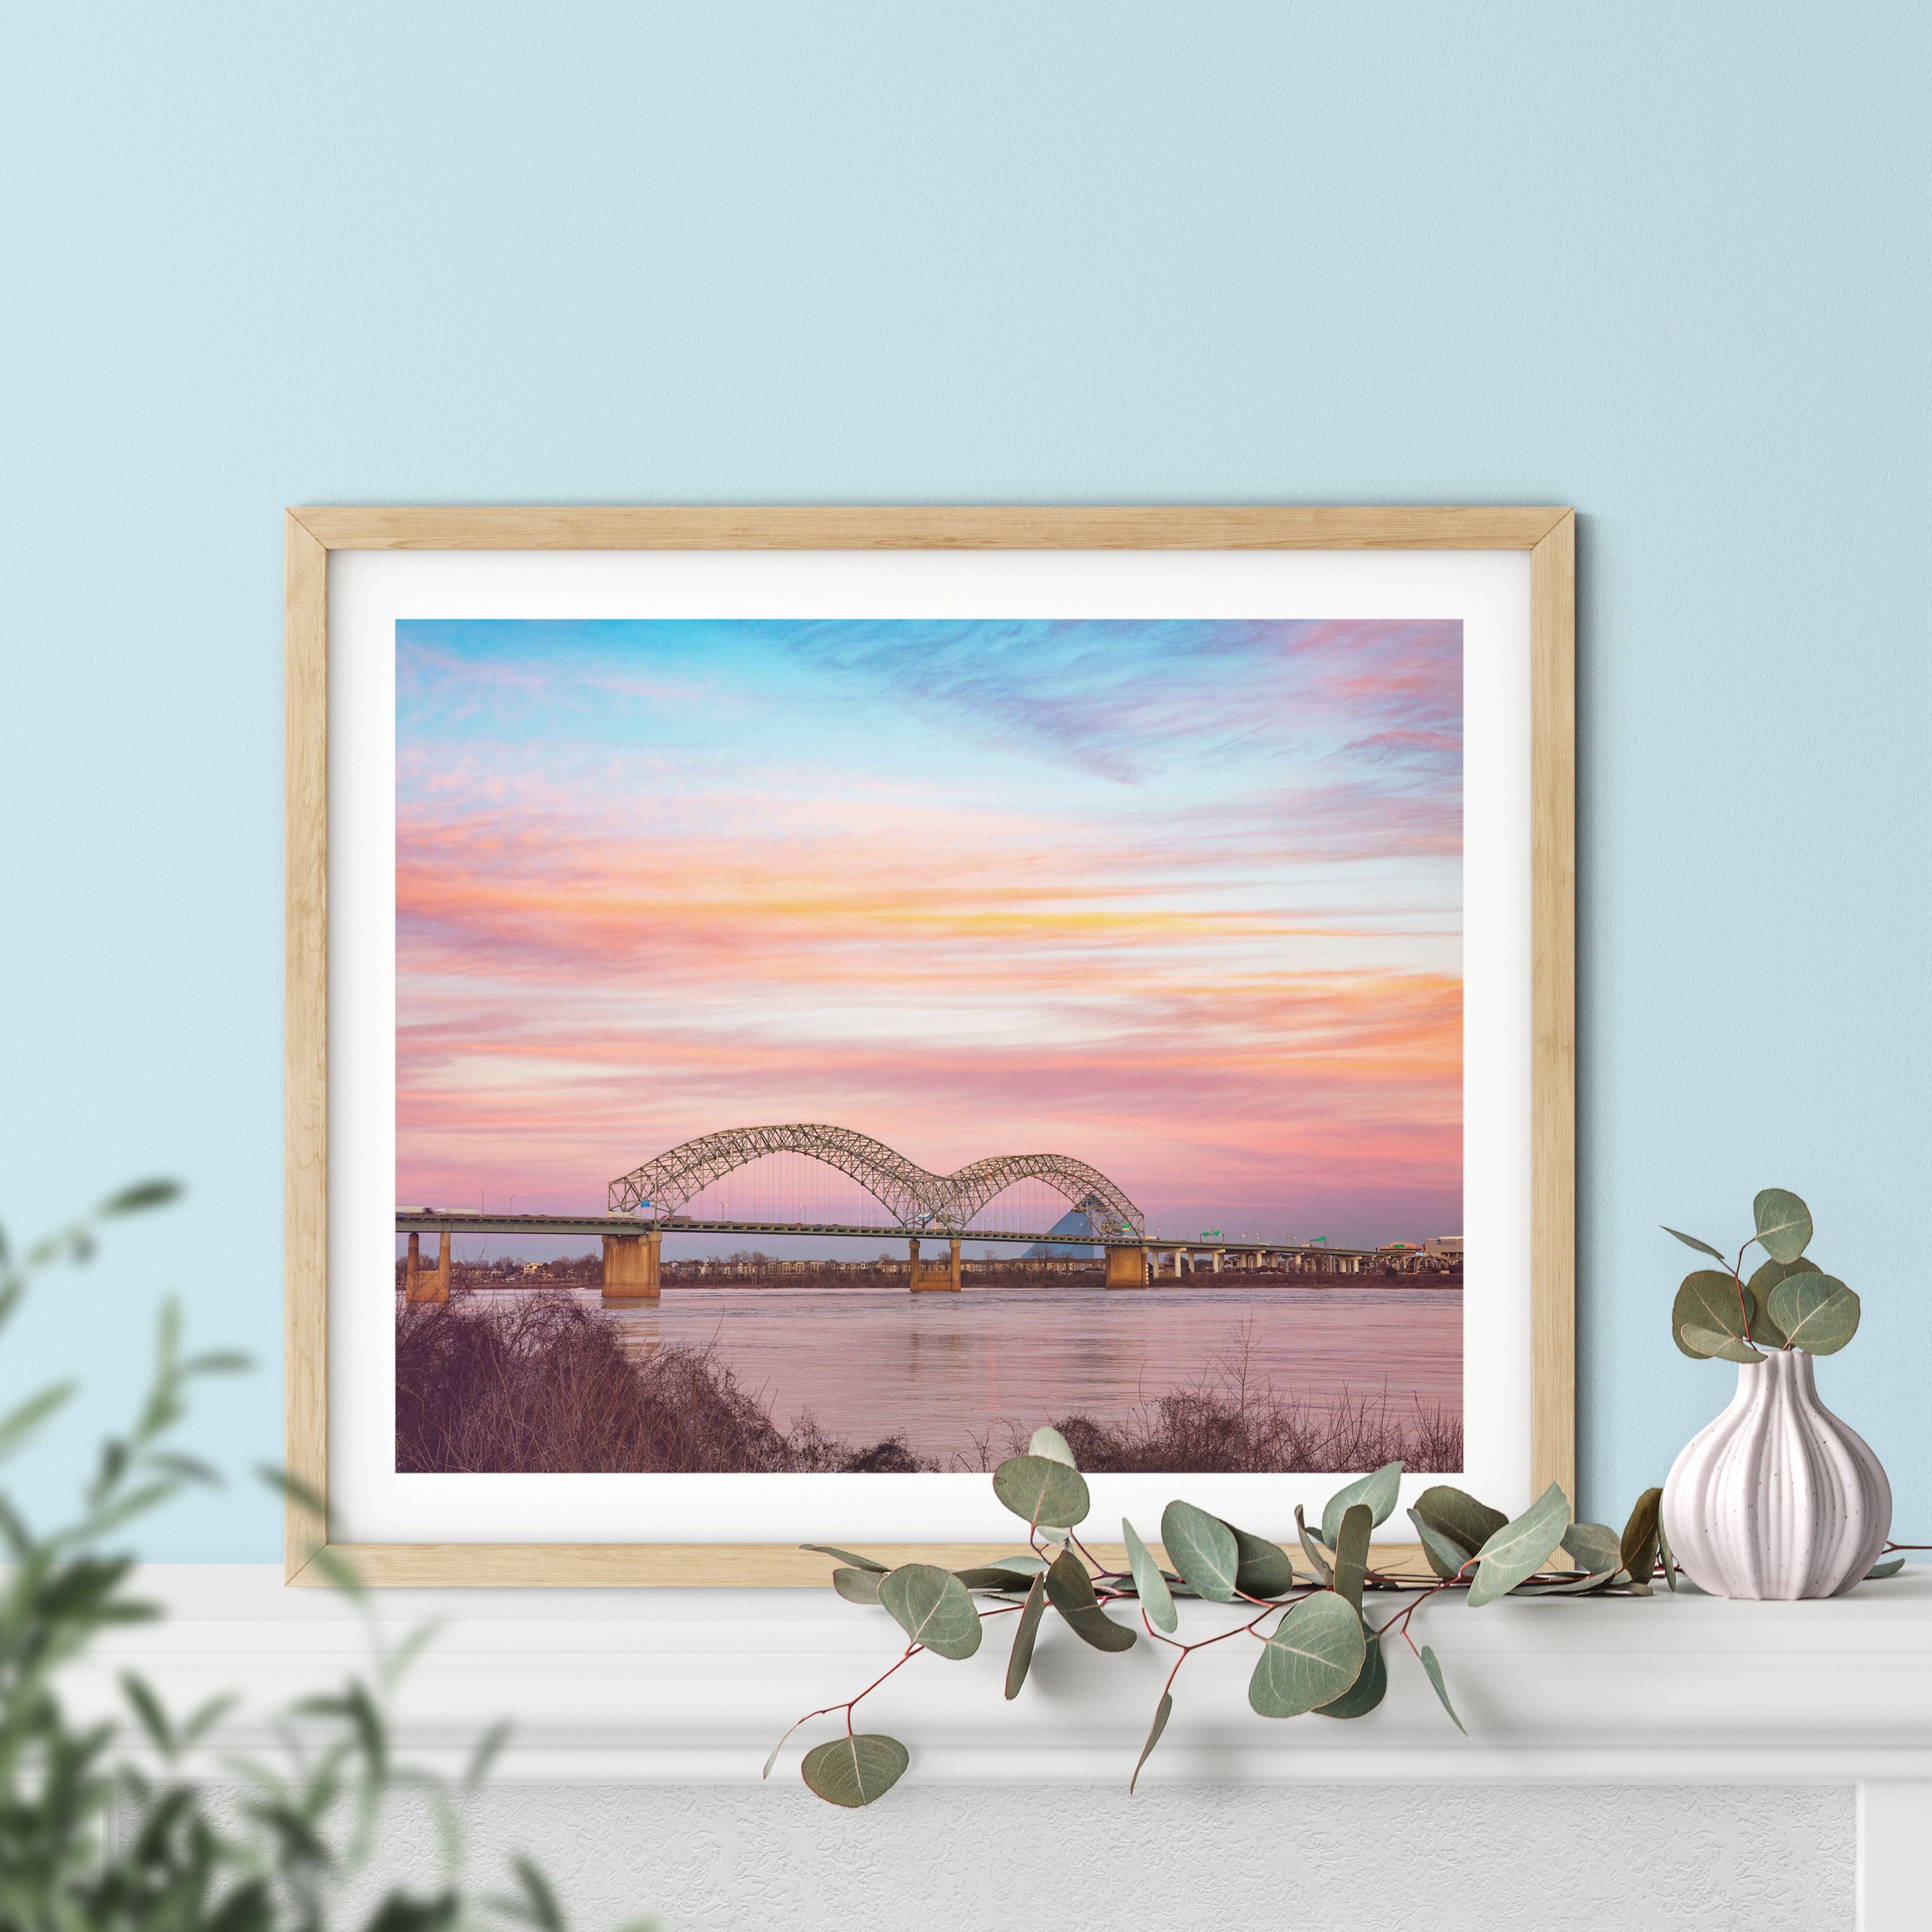 Memphis, Tennessee, bridge at sunset cotton candy skies photography print